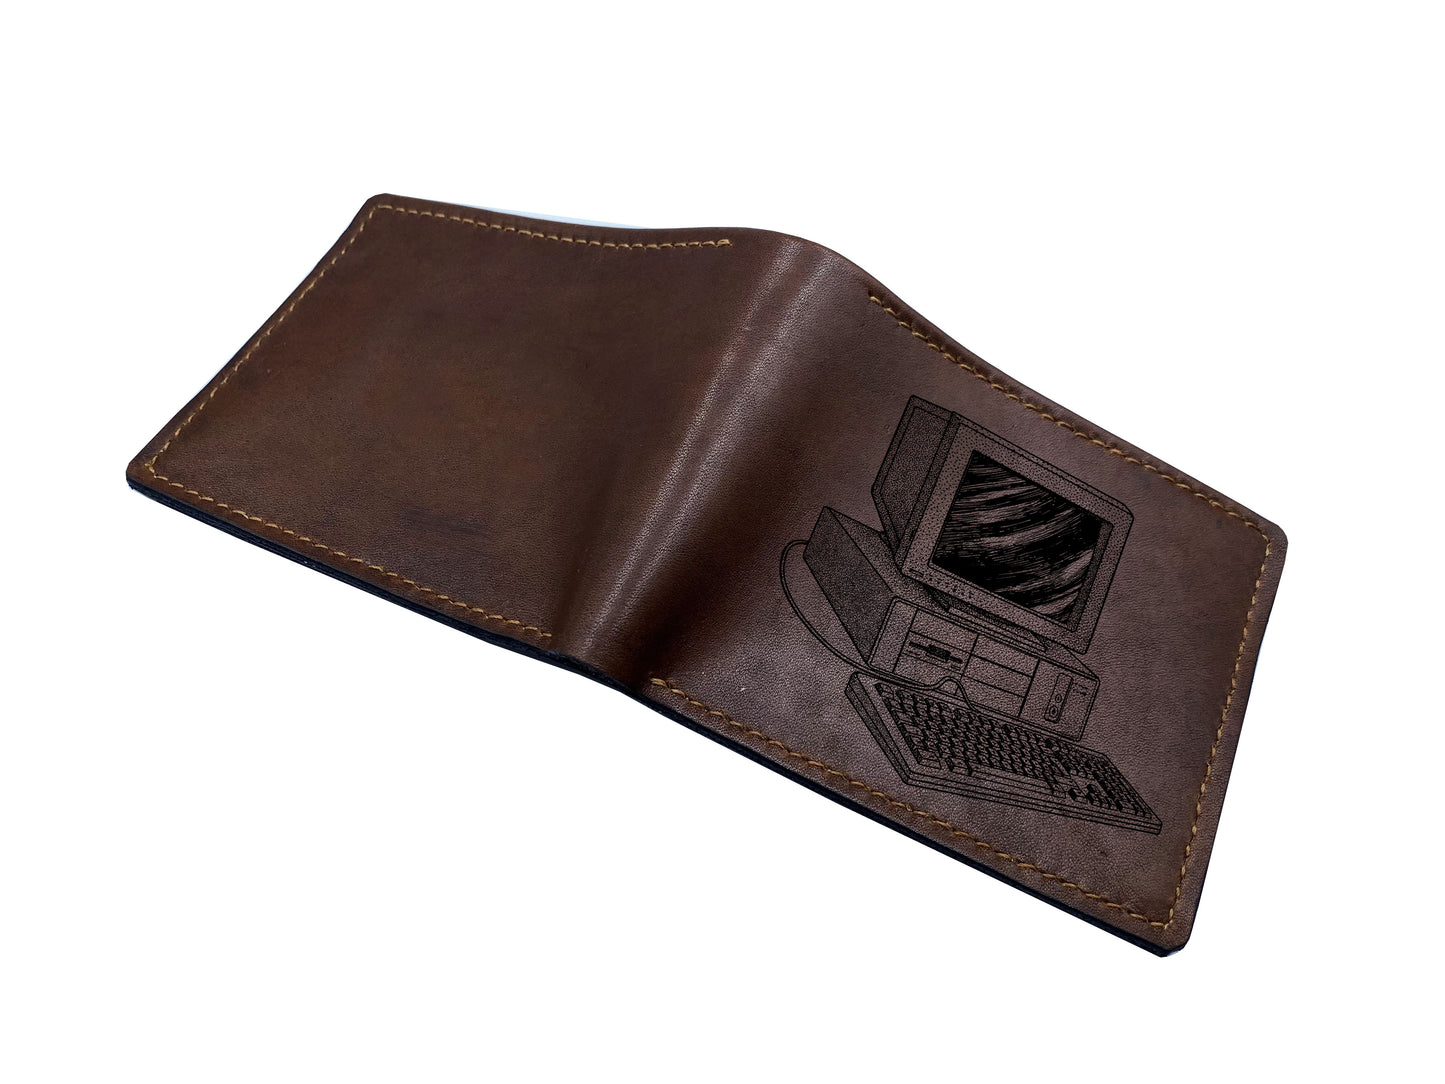 Mayan Corner - Vintage object things drawing, leather handmade wallet with shoes engraving, retro style bifold leather gift for men, wallet for him